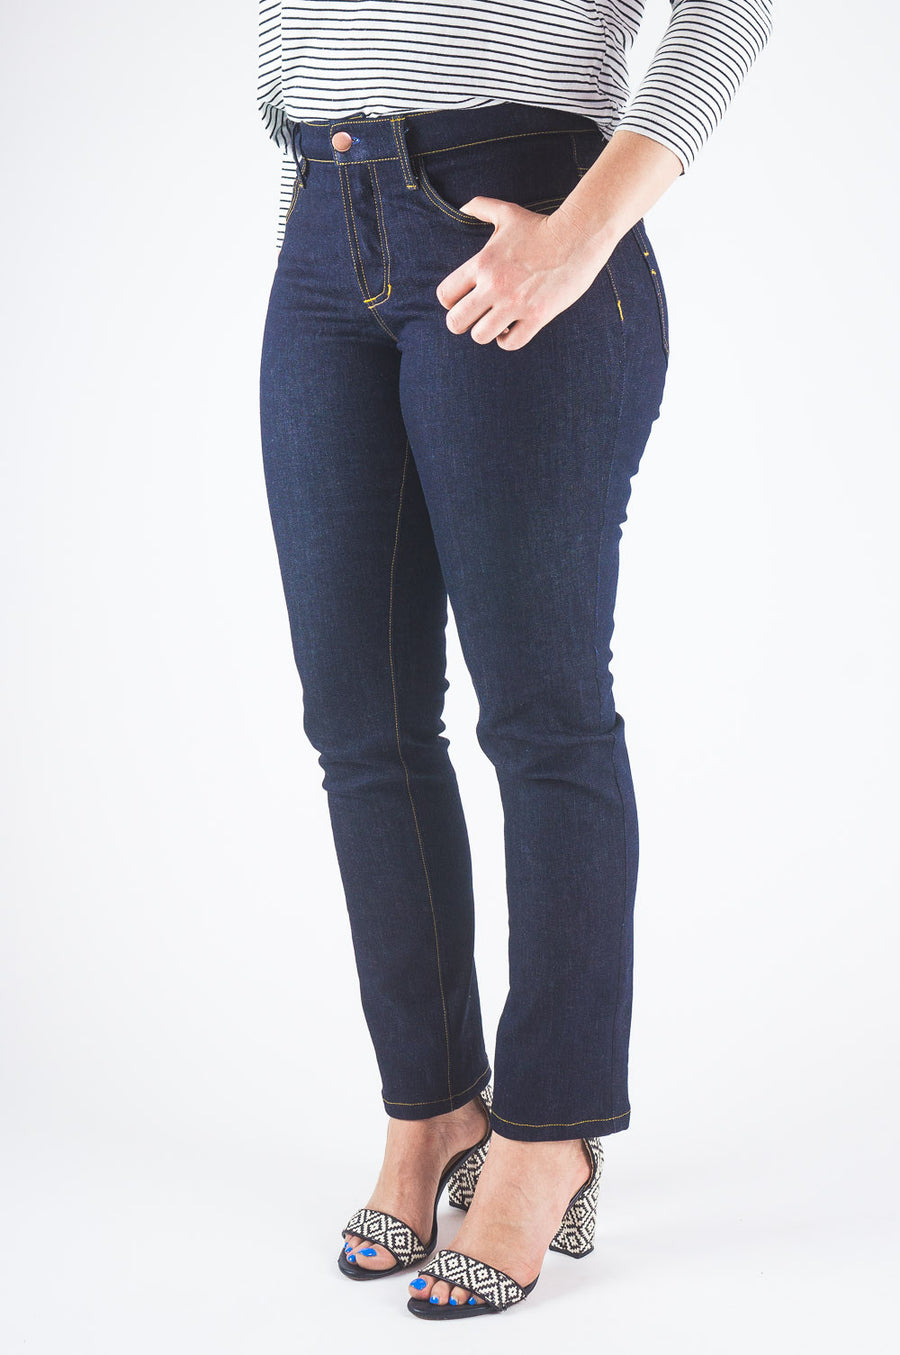 Ginger Jeans Pattern – Closet Core